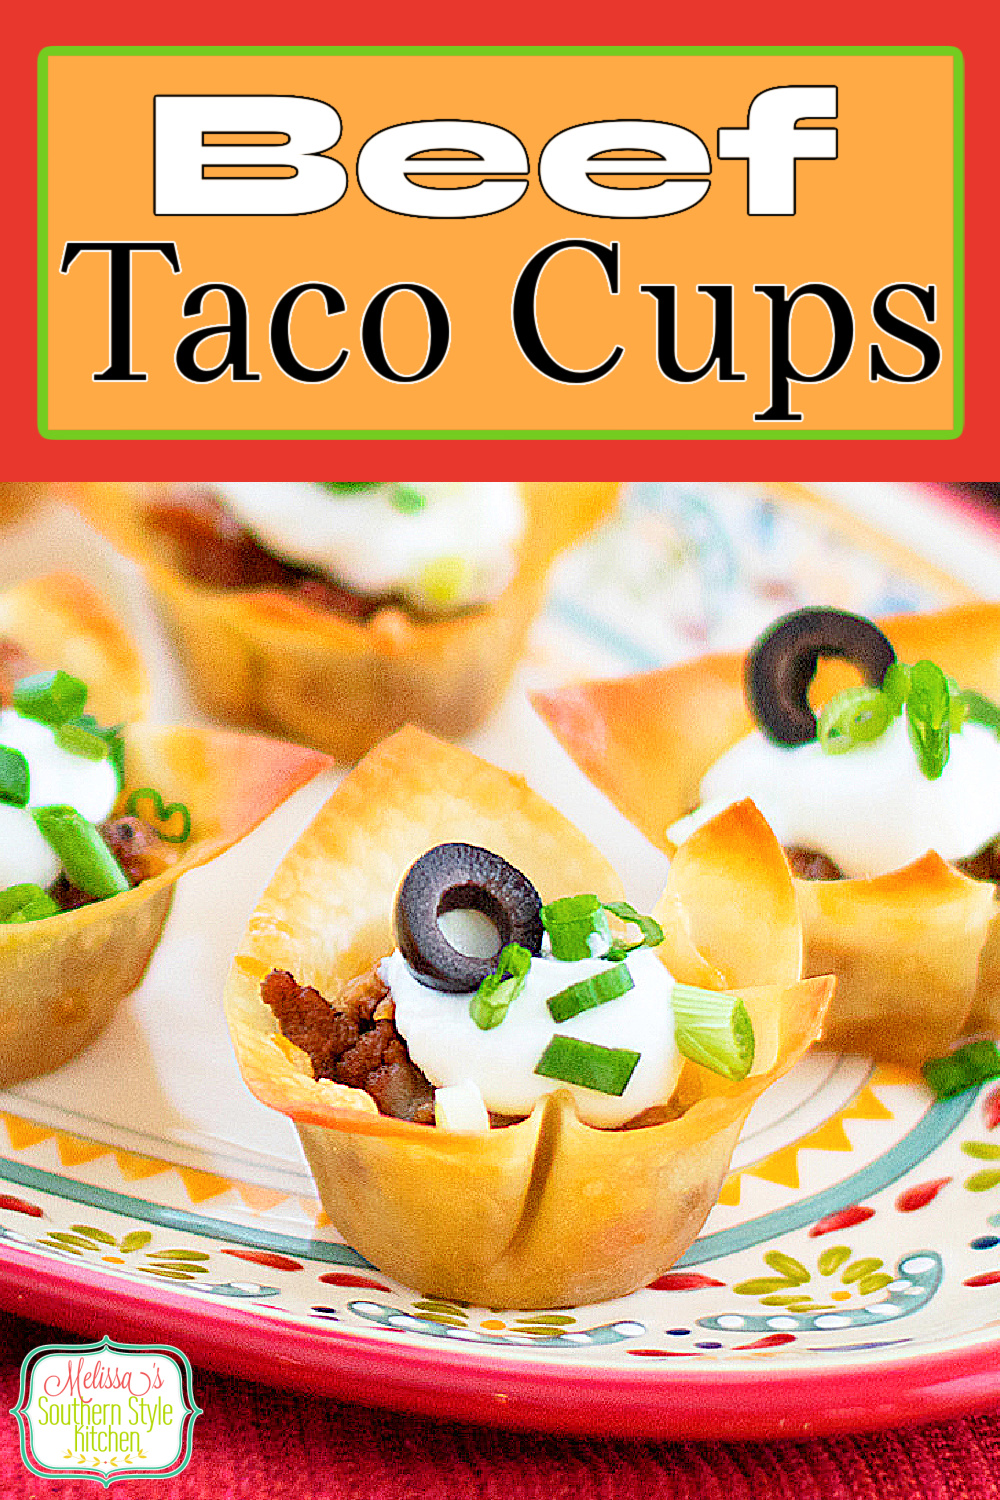 These two-bite Beef Taco Cups are made with wonton wrappers for the crust. top with your favorite taco fixin's and devour #beeftacos #beeftacocups #tacorecipes #appetizers #mexicanfood #partyfood #easygroundbeefrecipes #gamedayfood #snacks #southernfood #southernrecipes #superbowlsnacks via @melissasssk